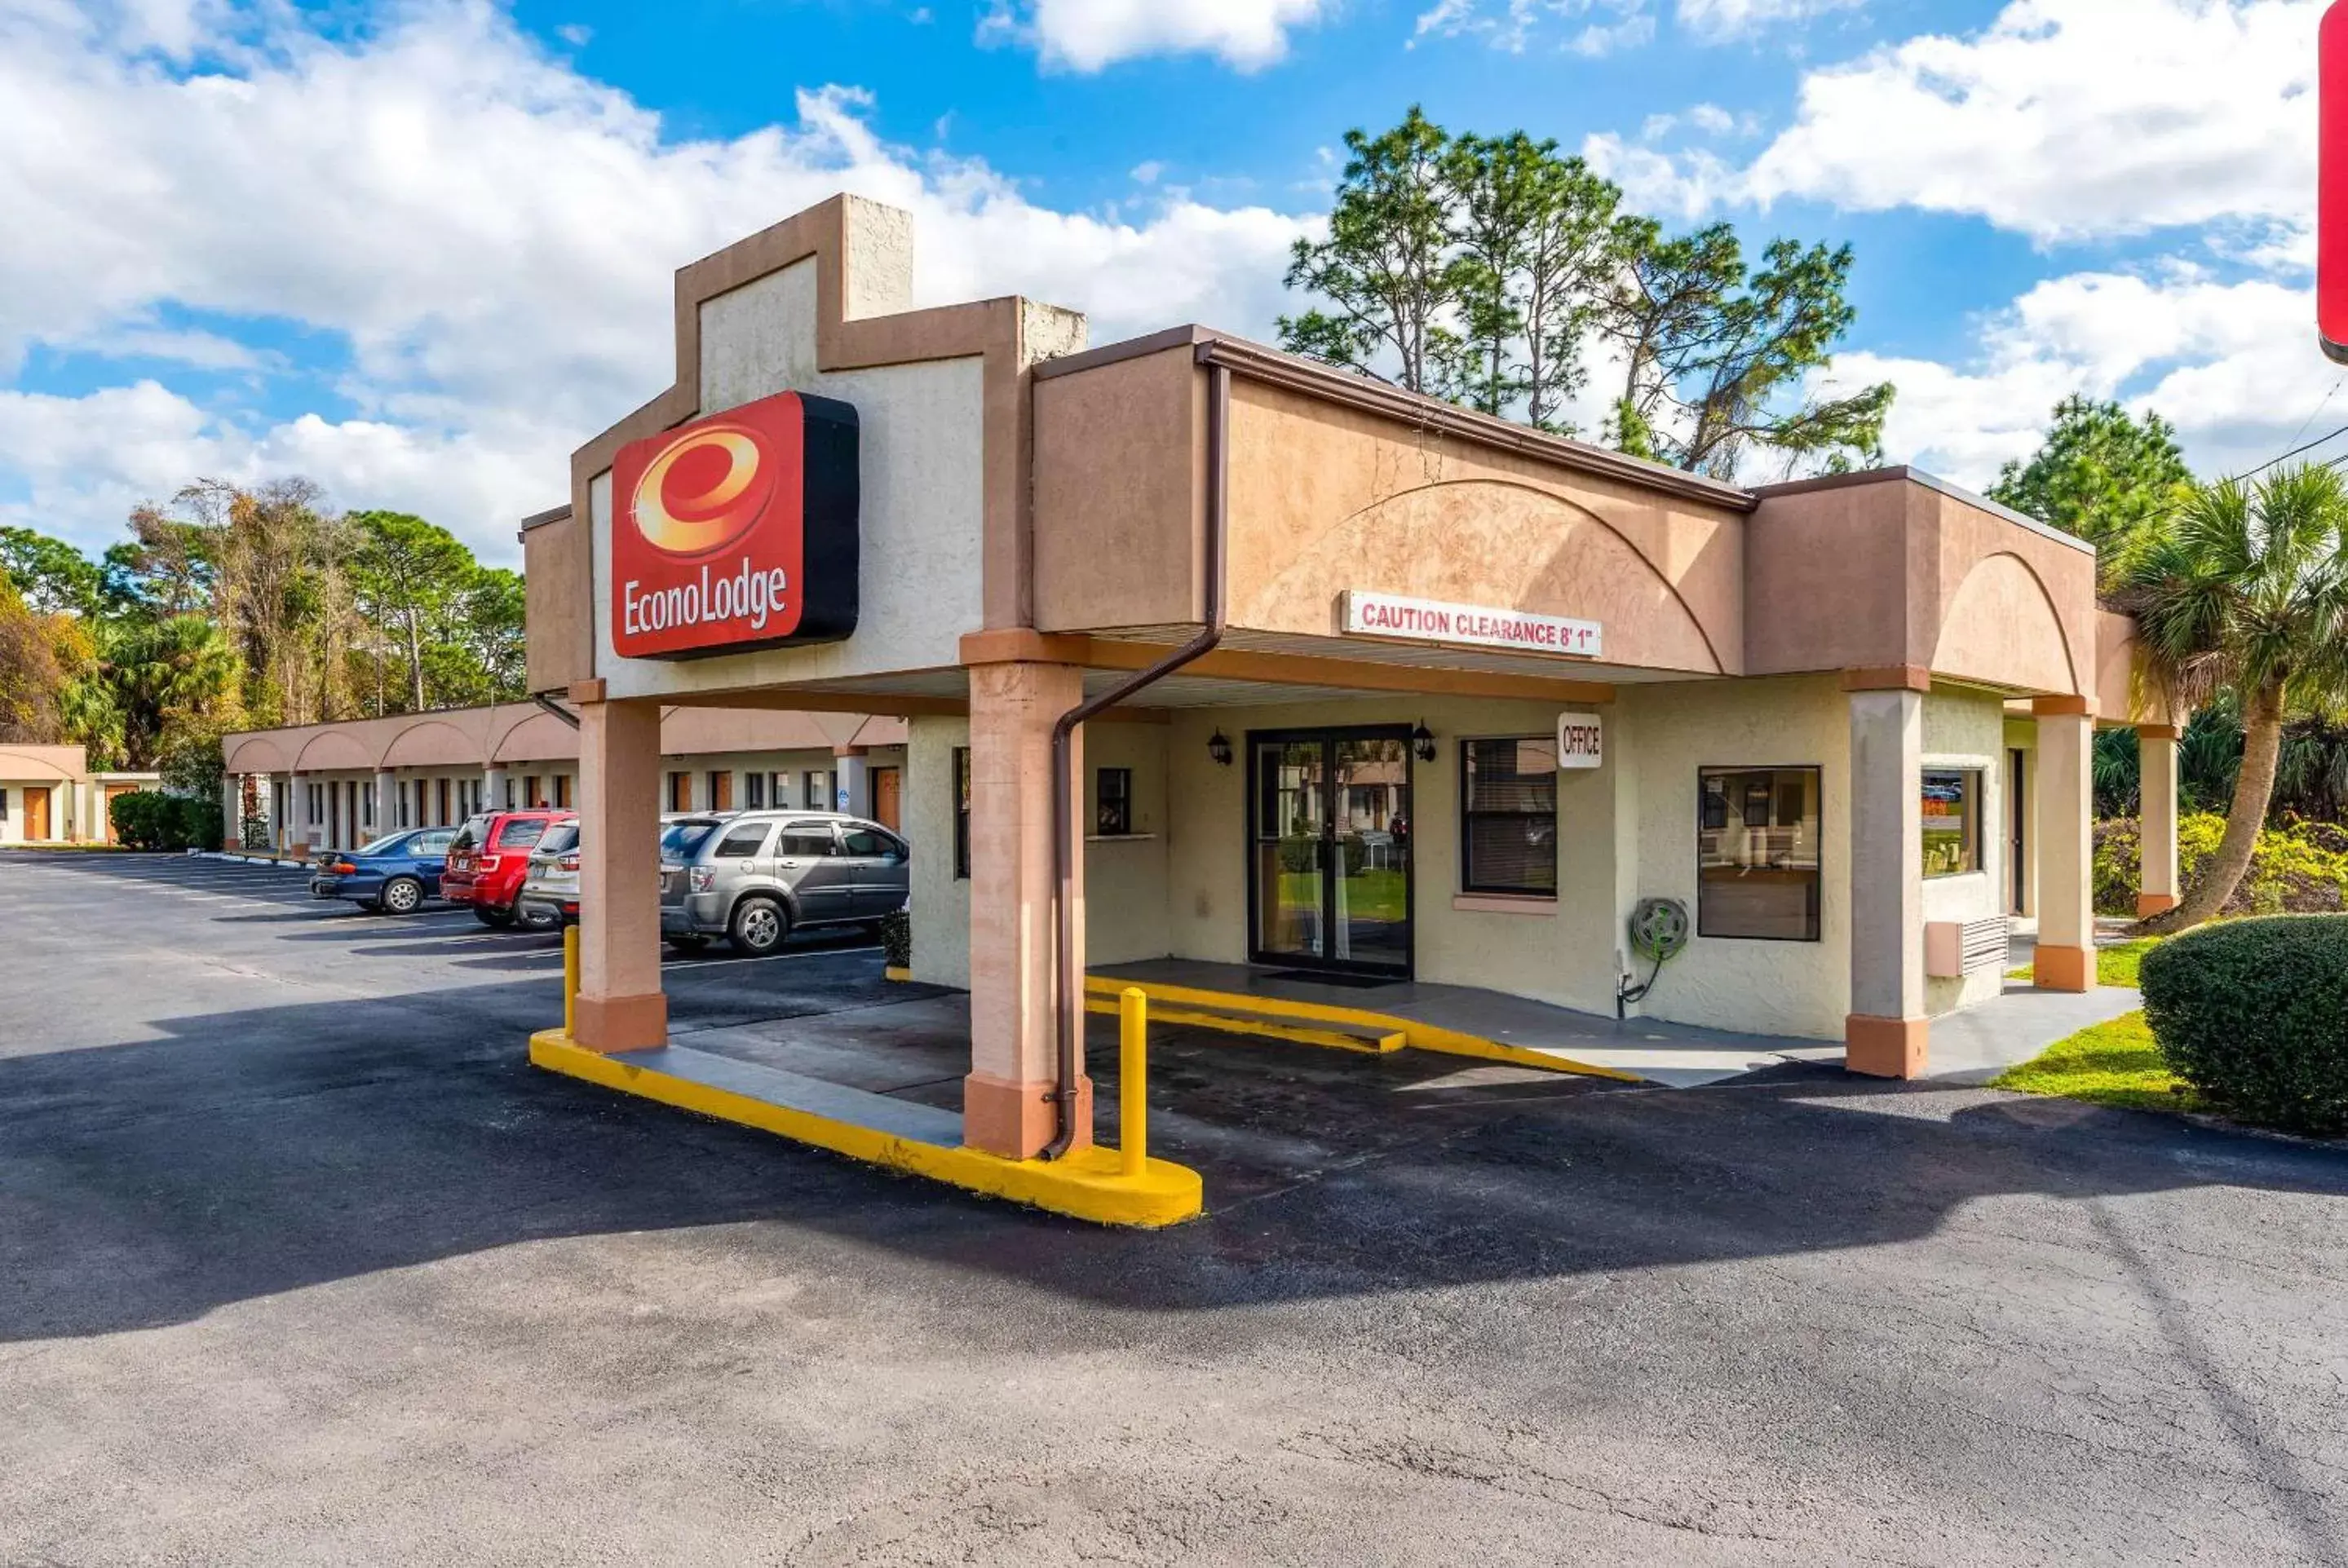 Property Building in Econo Lodge Crystal River